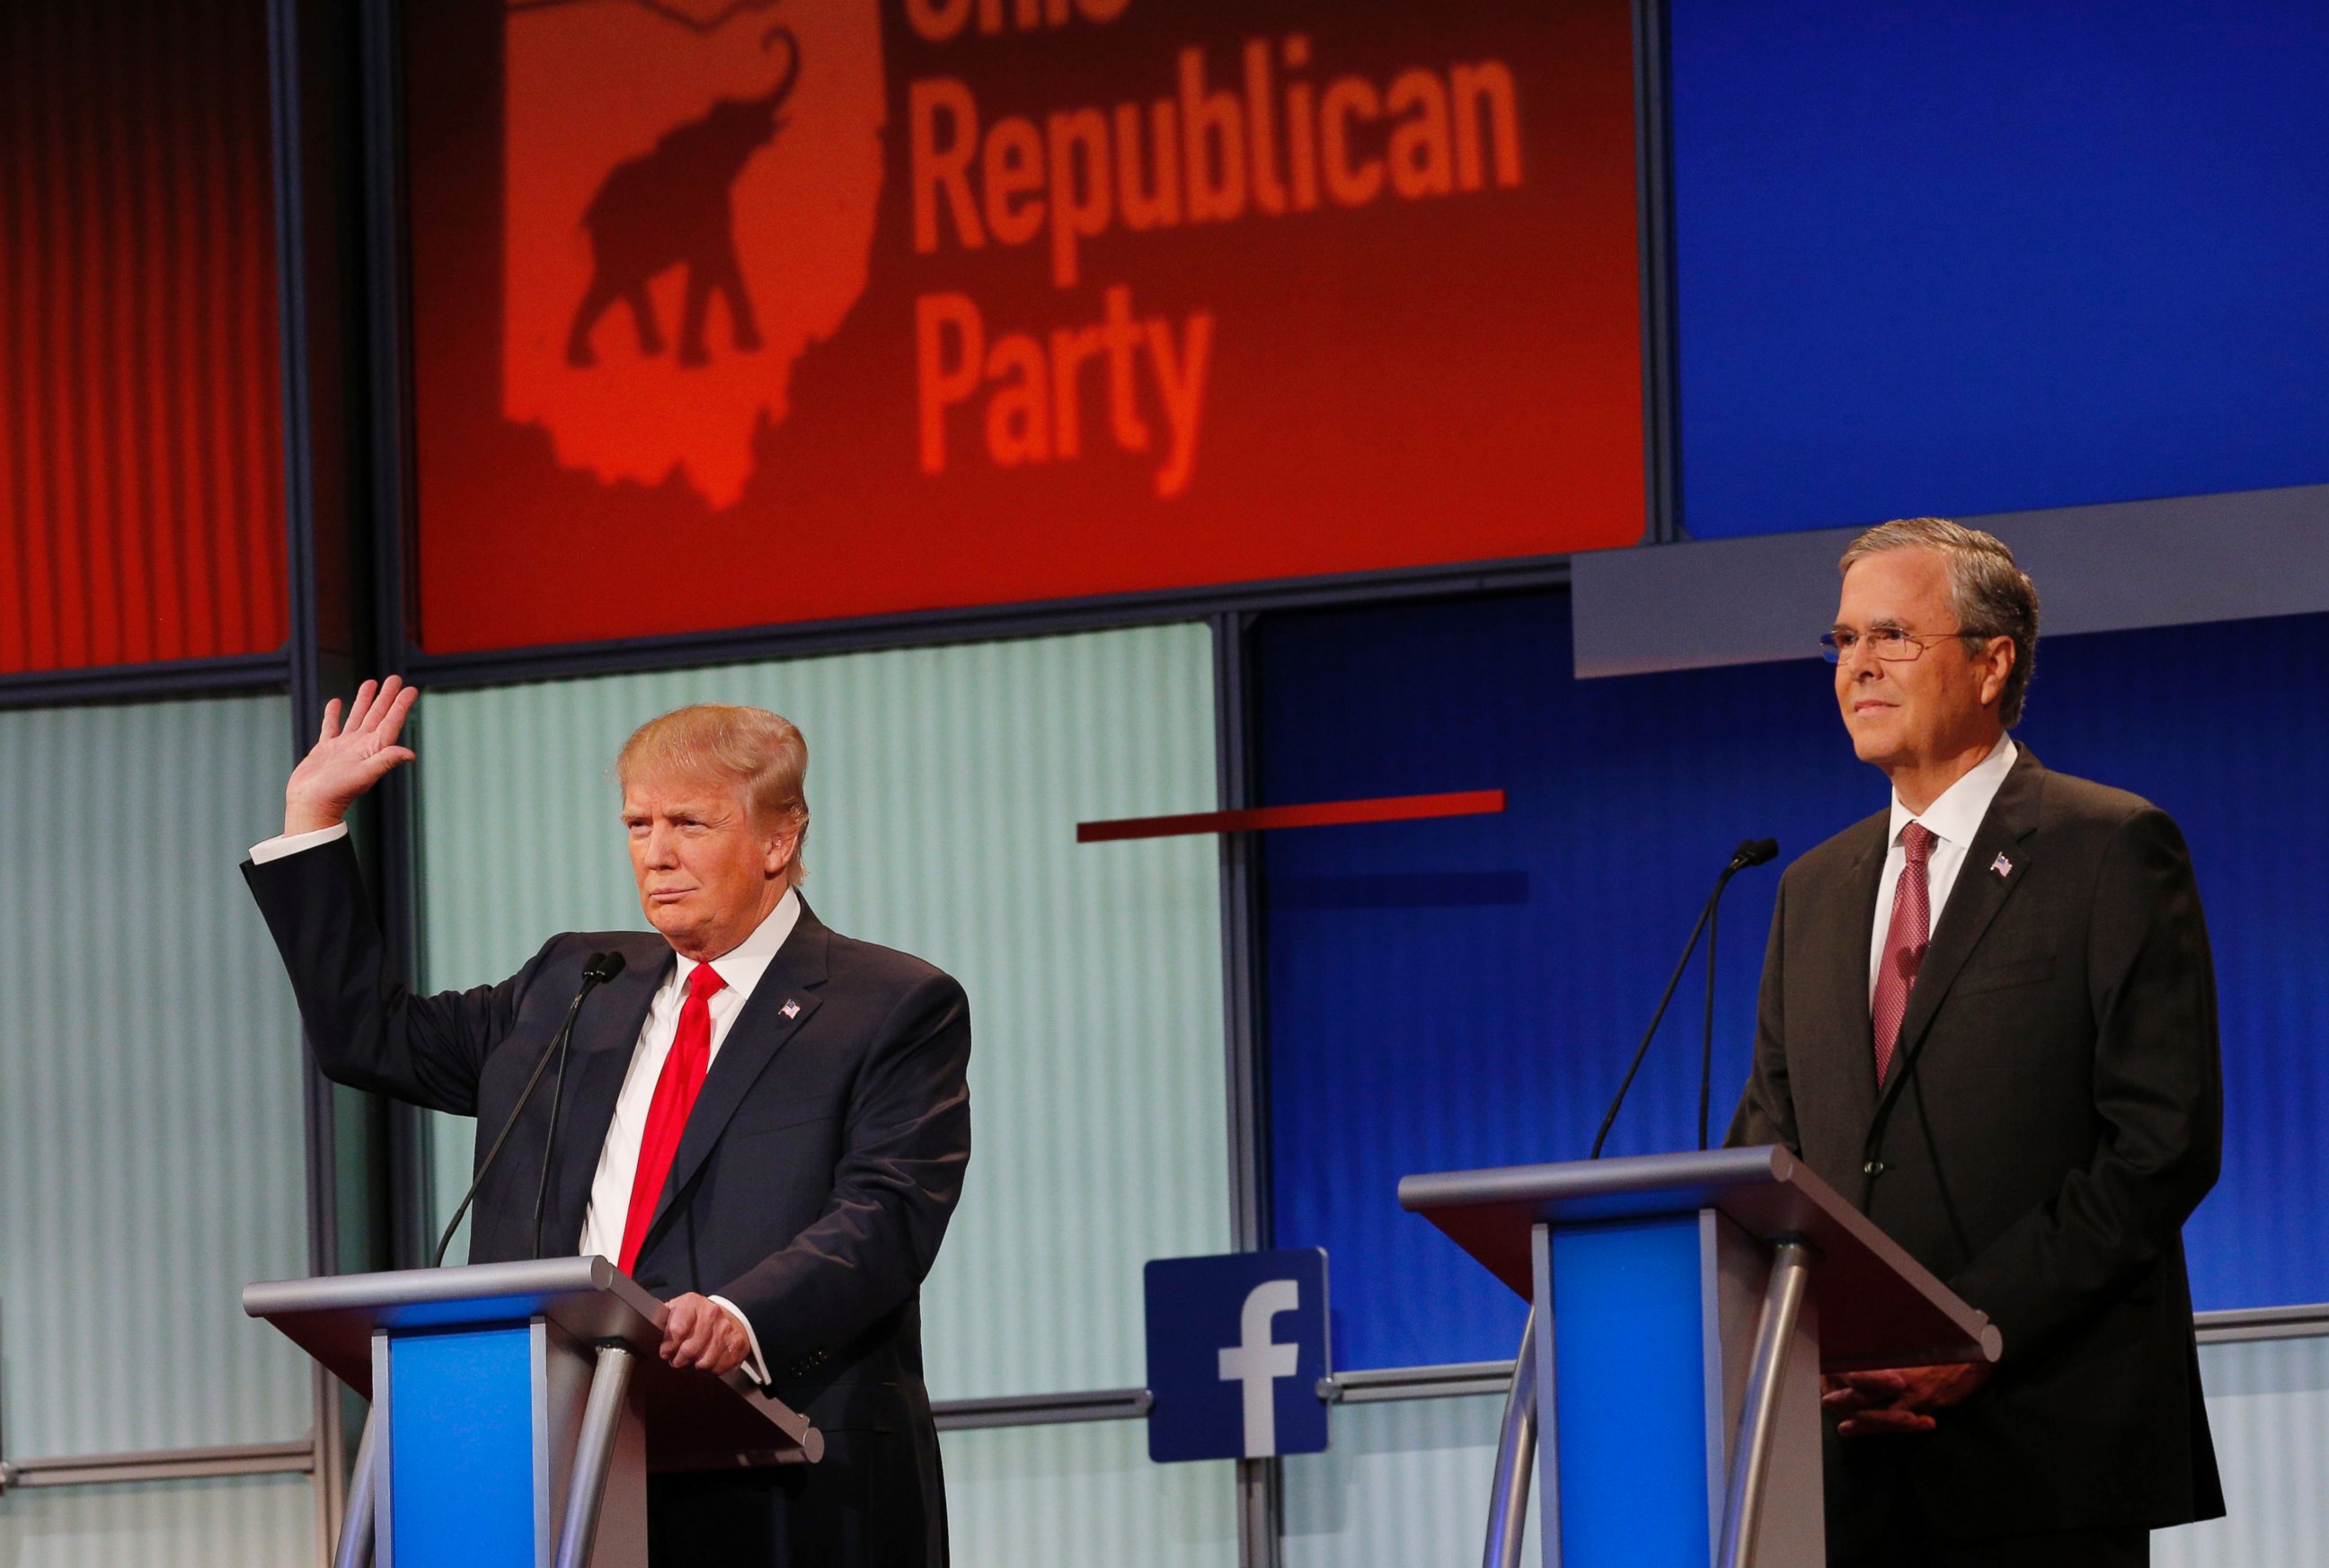 PHOTO: Donald Trump raises his hand to say that he will not take a pledge not to run as an Independent candidate for president as former Governor Jeb Bush looks on at the first Republican presidential candidates debate in Ohio, Aug. 6, 2015.